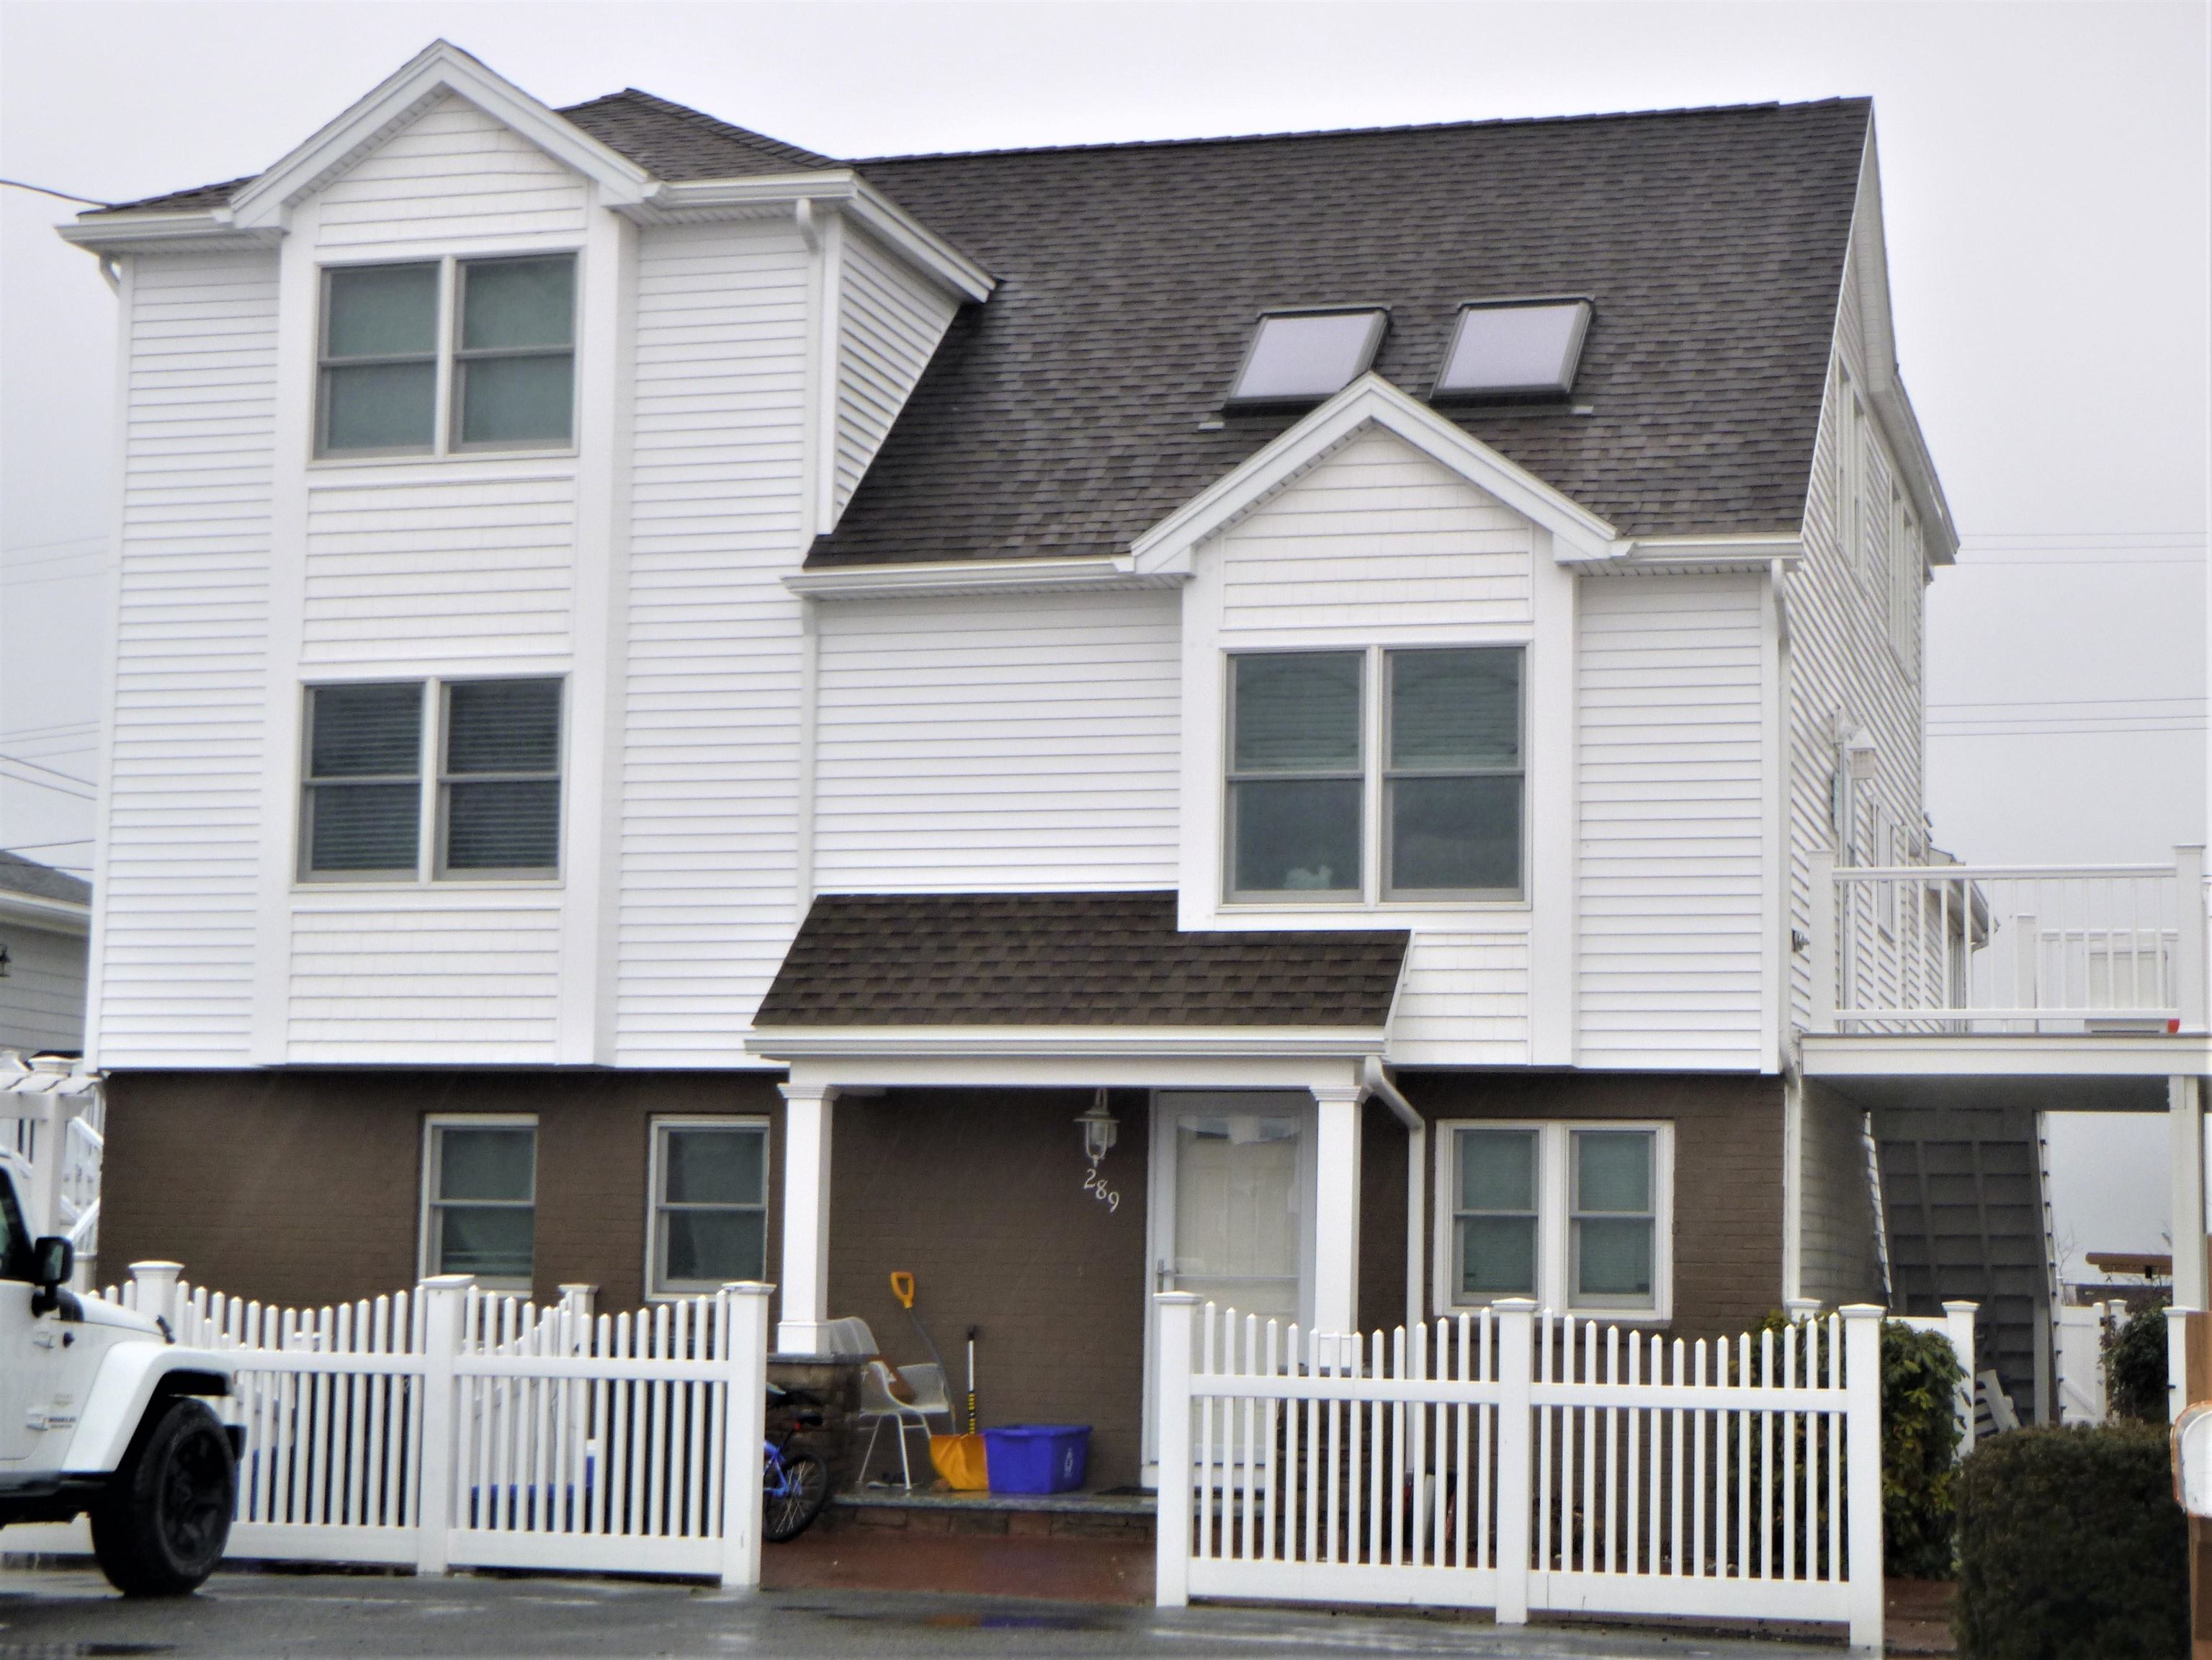 MLS 4990414: 289 Portsmouth Avenue-Unit UP, Seabrook NH